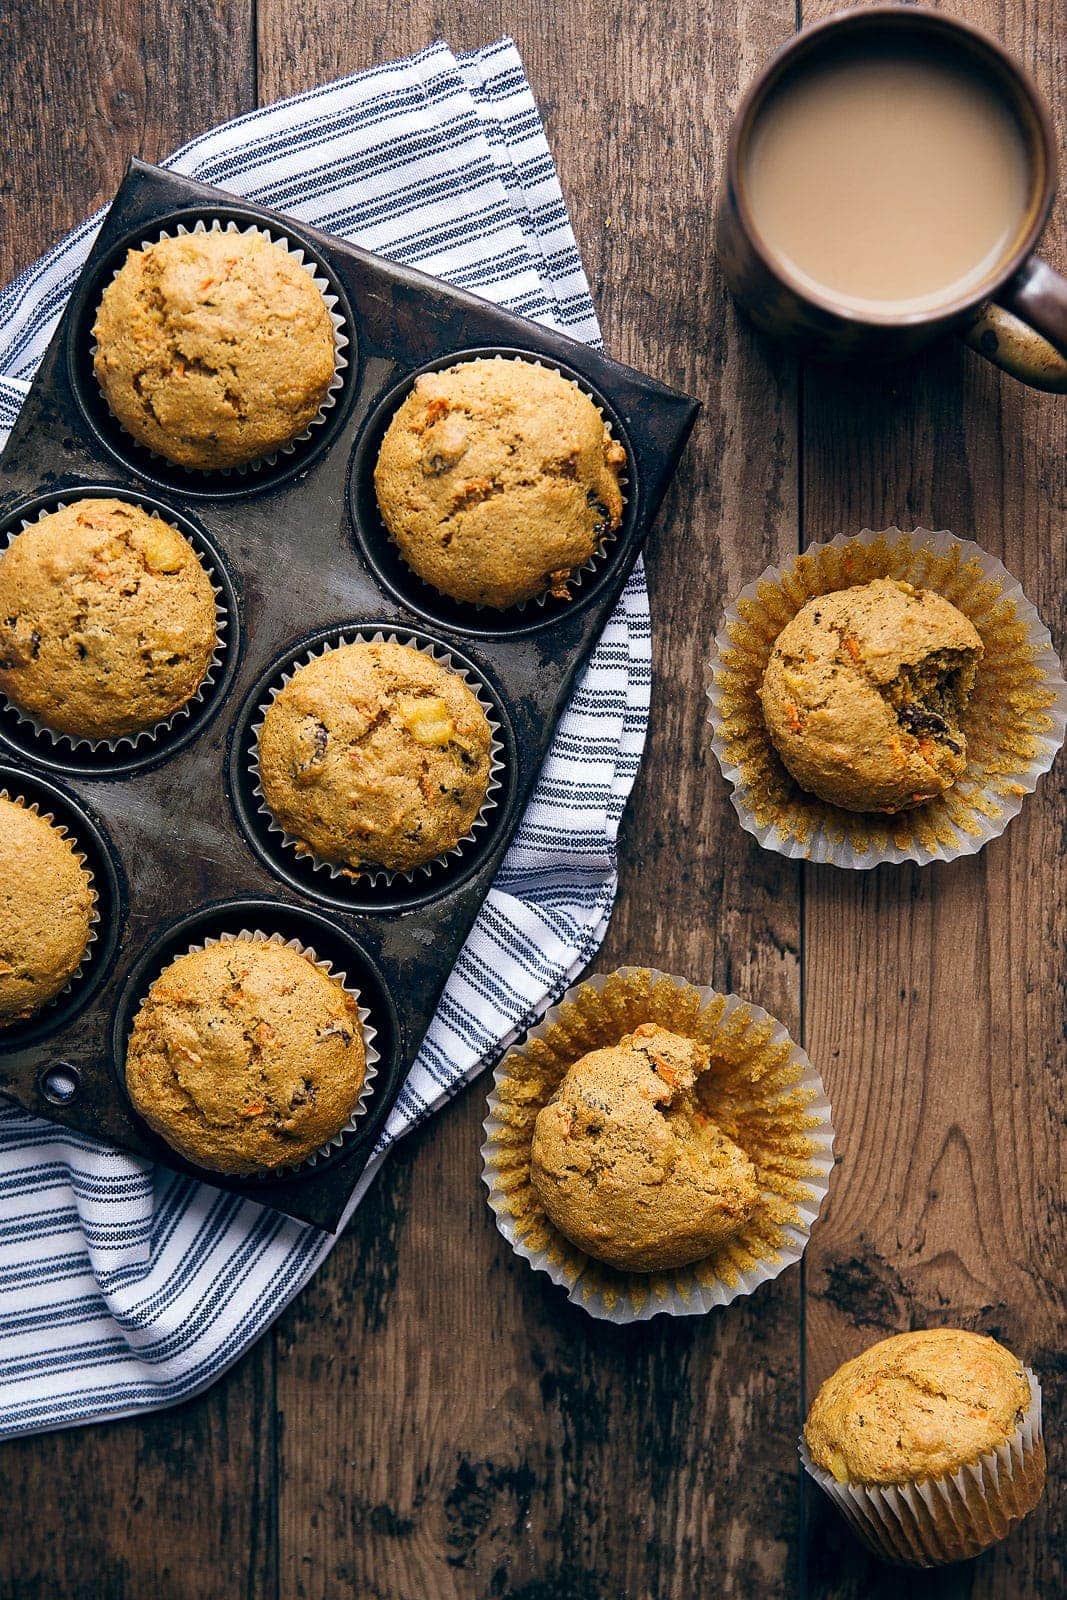 Nothing says good morning like Morning Glory Muffins, packed with carrots, pineapple, coconut, and more!